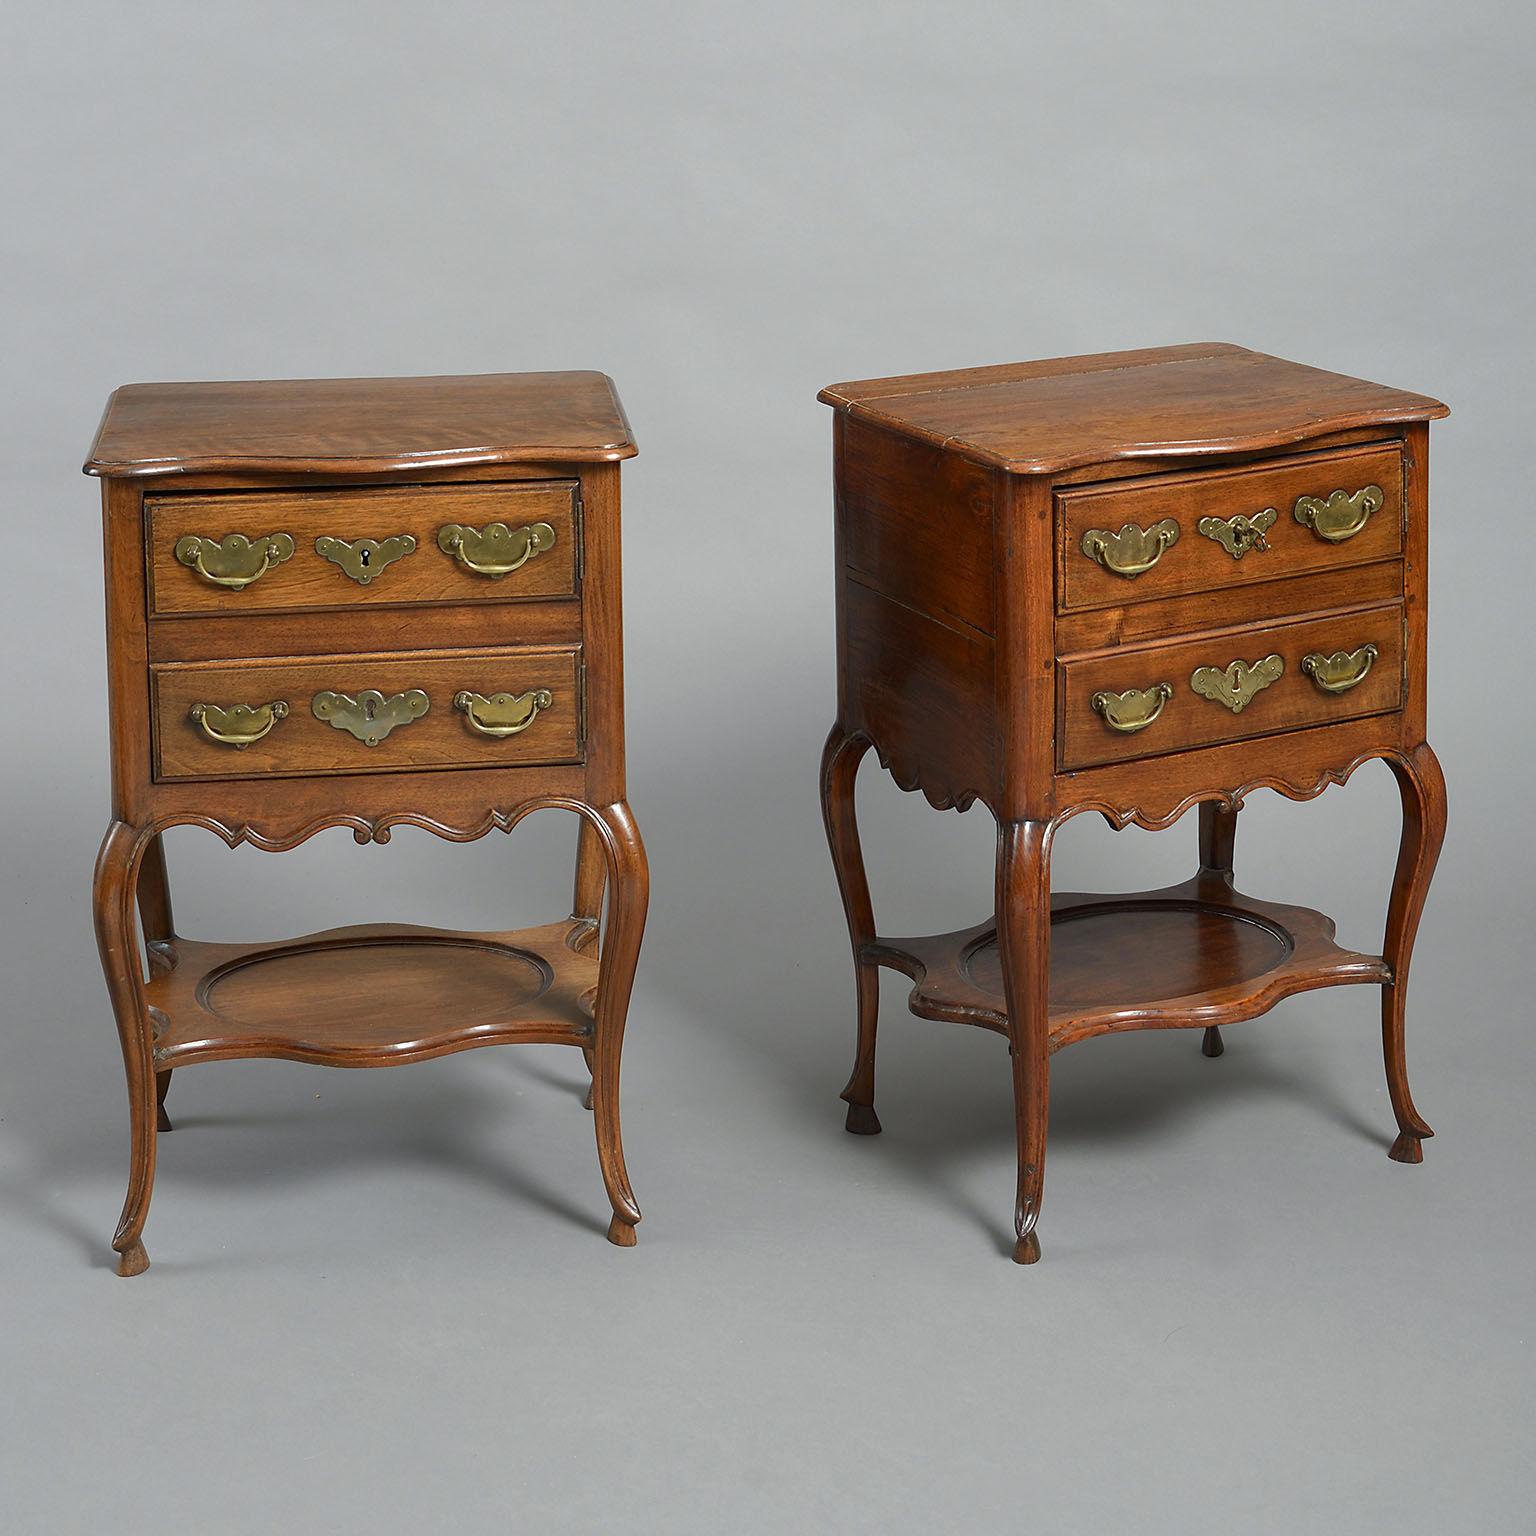 A pair of Spanish walnut and chestnut bedside tables. The serpentine fronted tops above cupboards simulating a pair of drawers, raised on cabriole legs joined by shelf stretchers, with engraved brass handles and lockplates. One mid-18th century, the